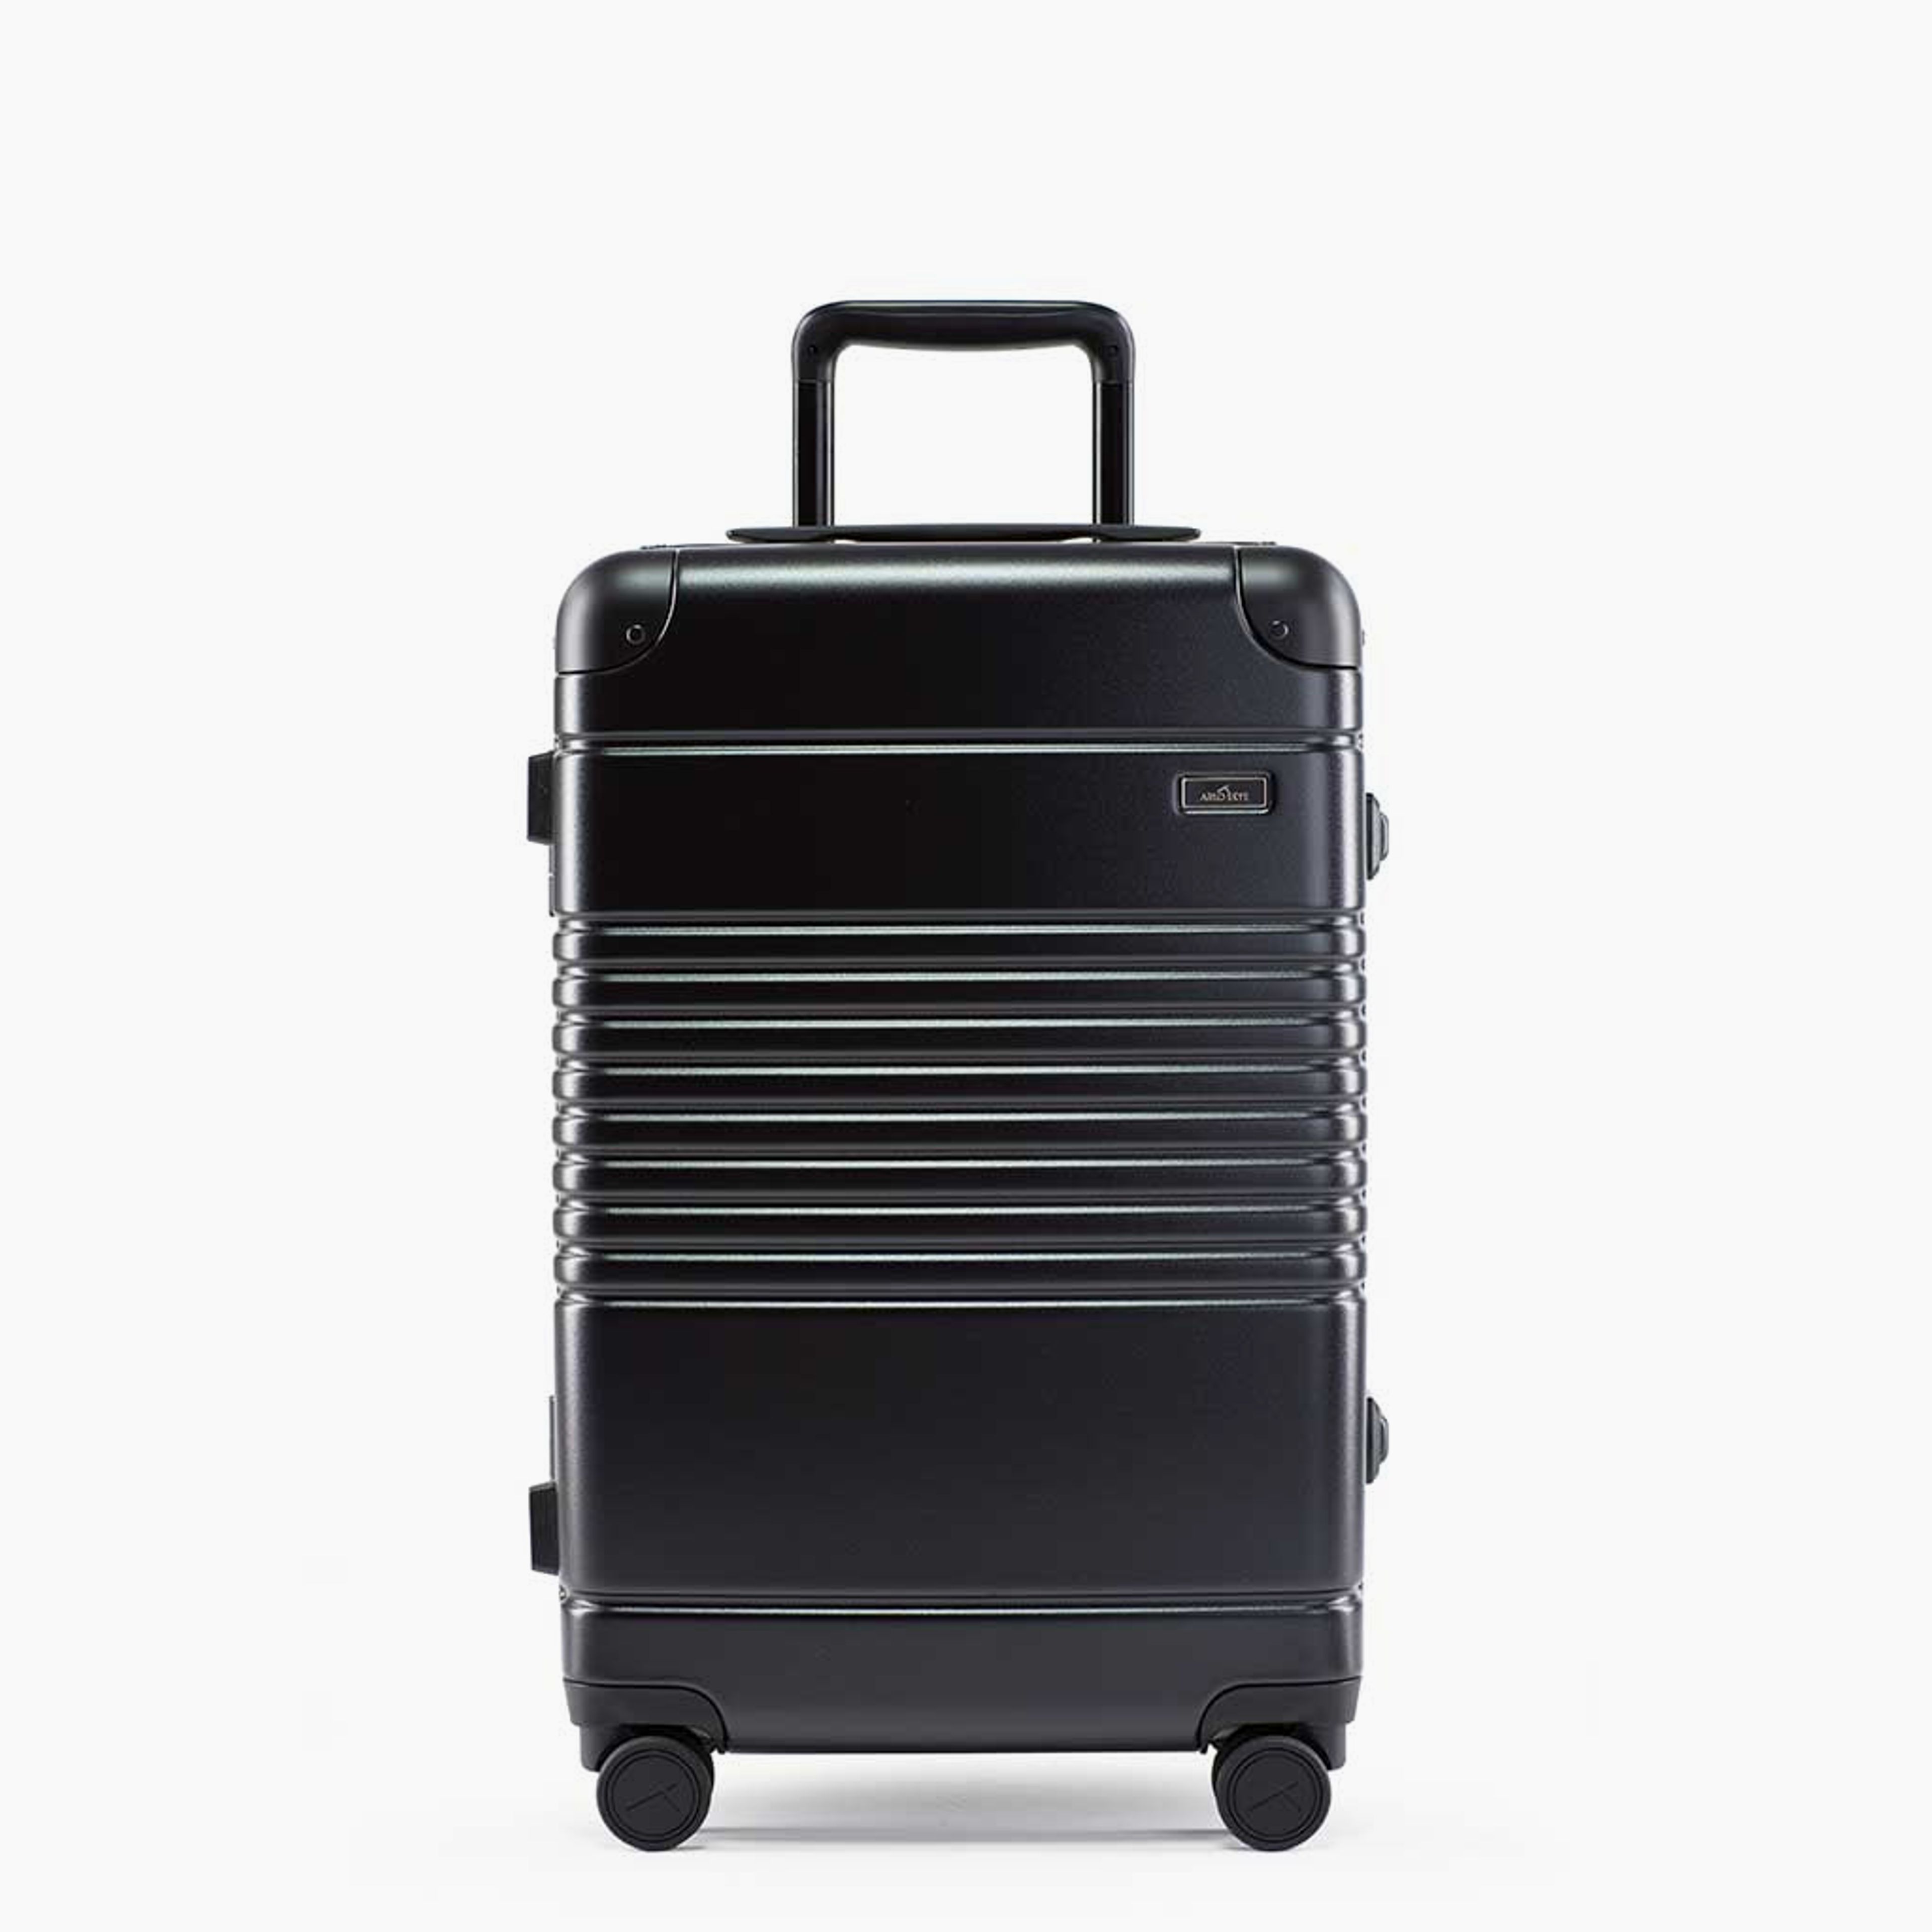 The Frame Carry-On Max